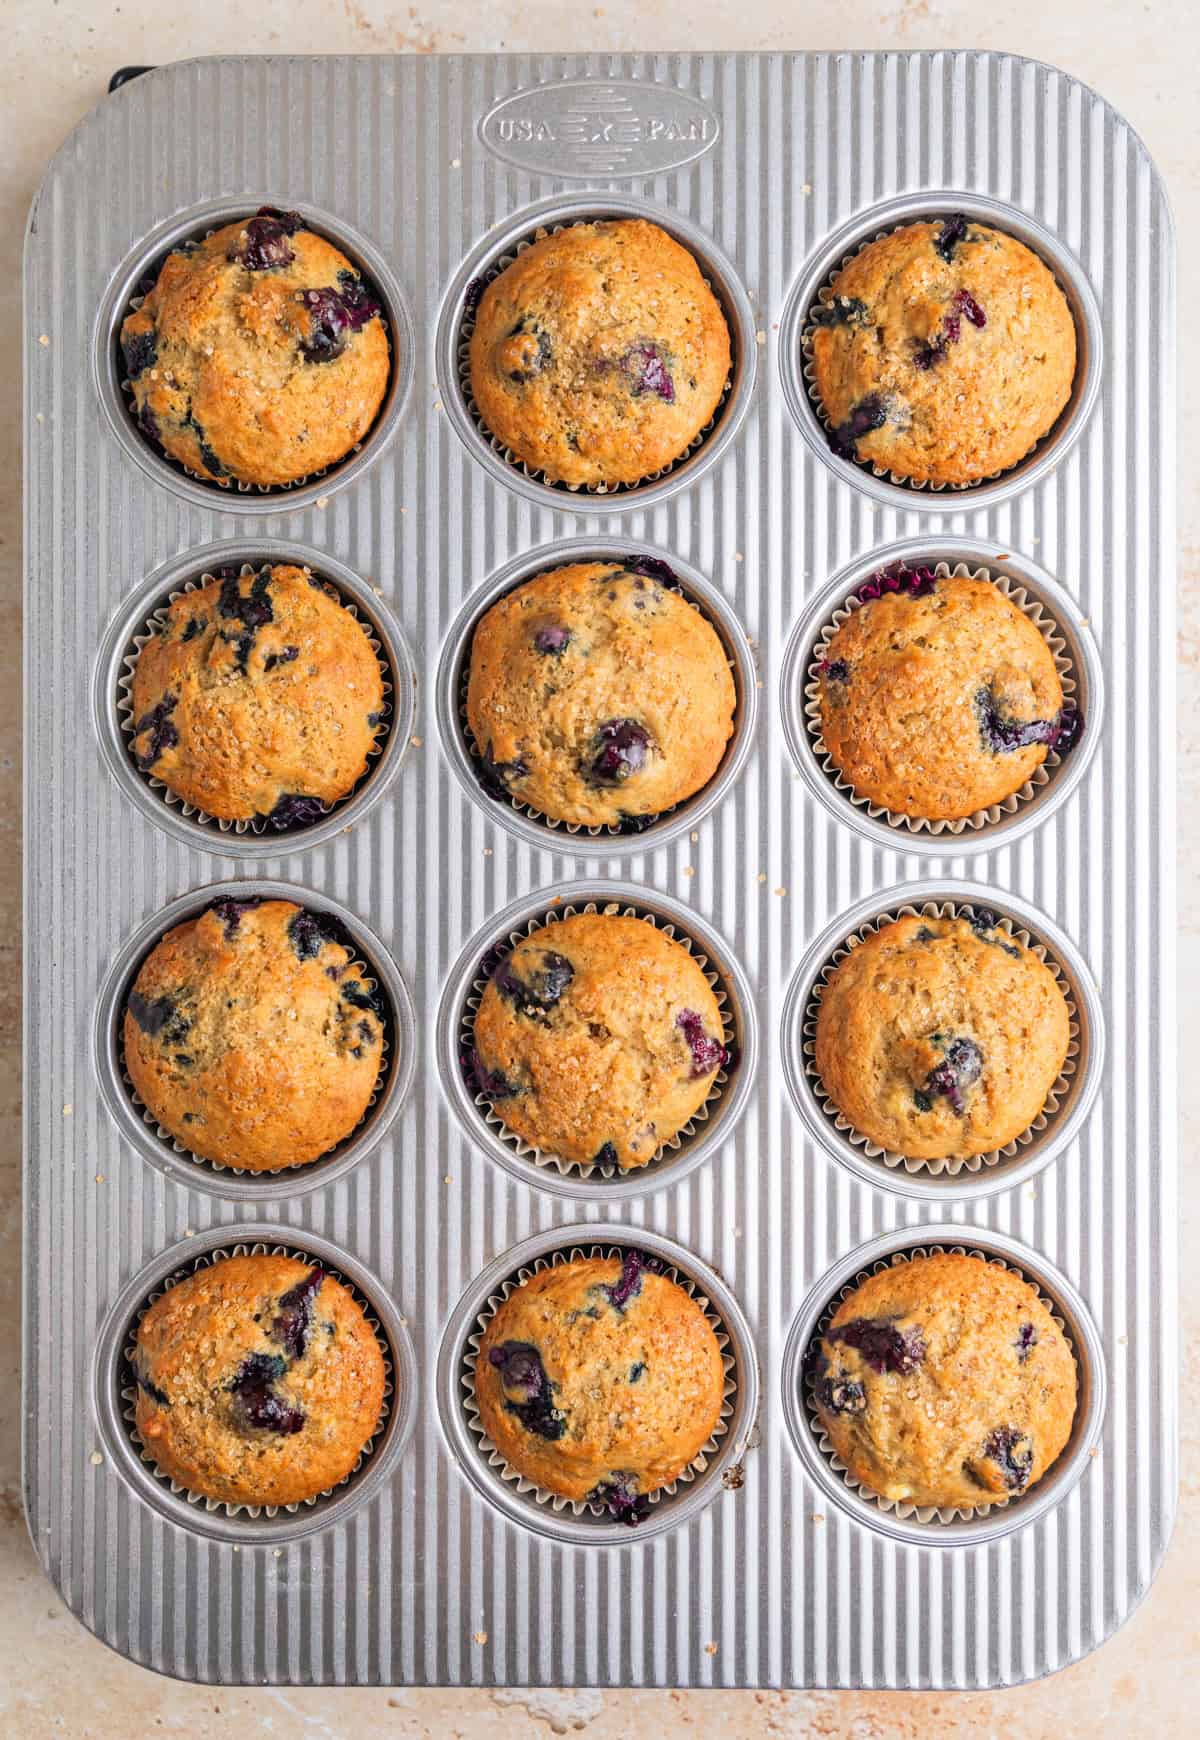 Muffins after baking in muffin tin.